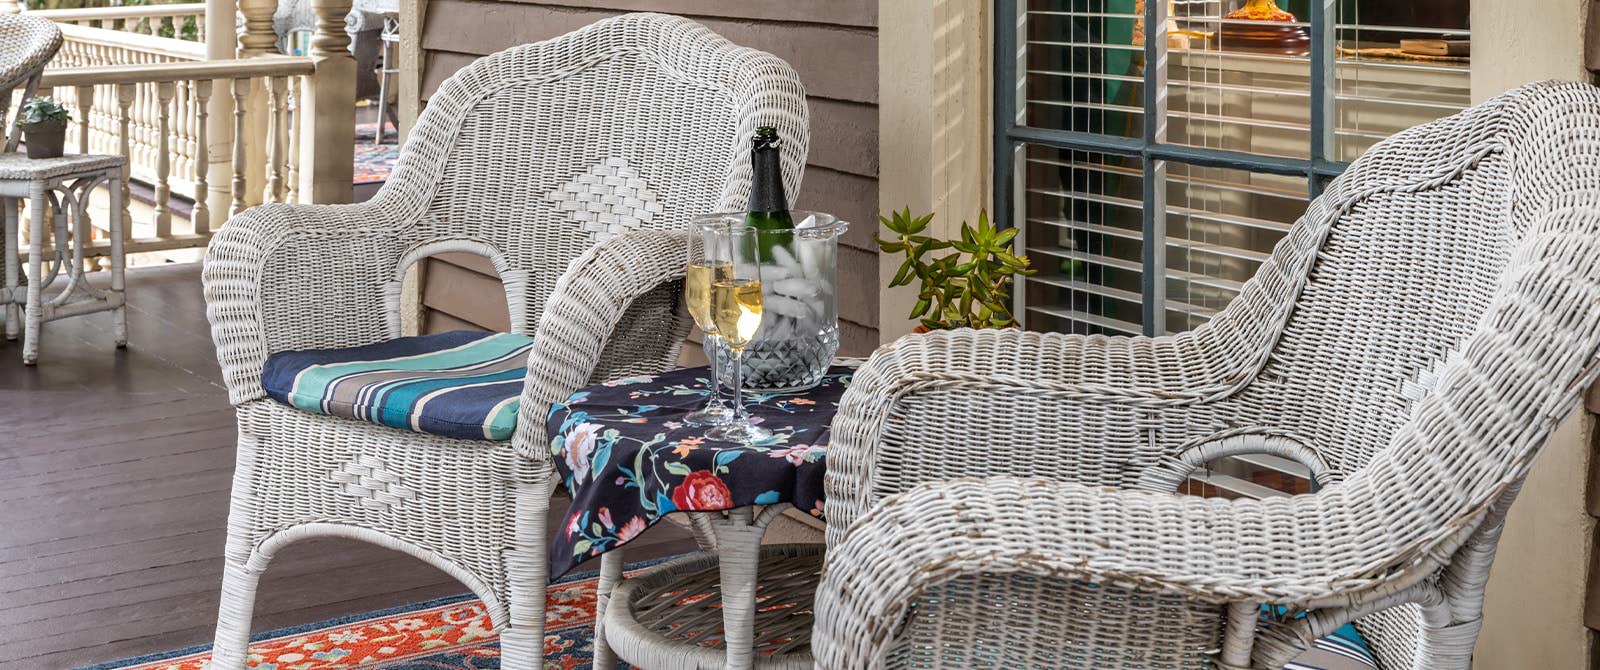 Close up view of white wicker patio chairs and table with glasses filled with Champagne and bottle chilling in vase with ice